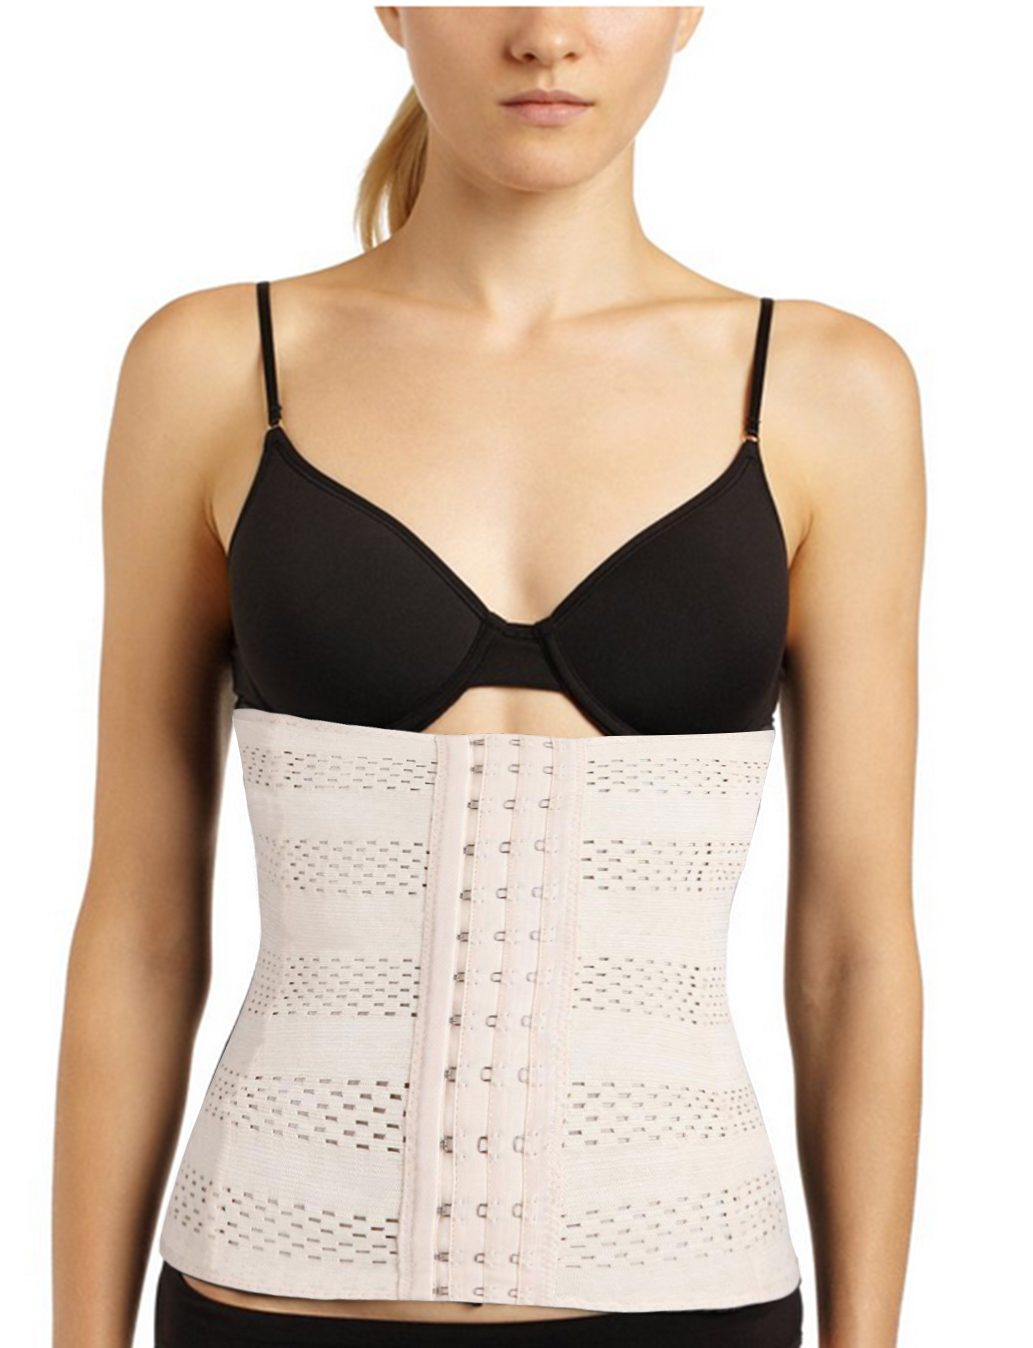 F3234-2 Easy up Easy down Firm Control Waist Cincher